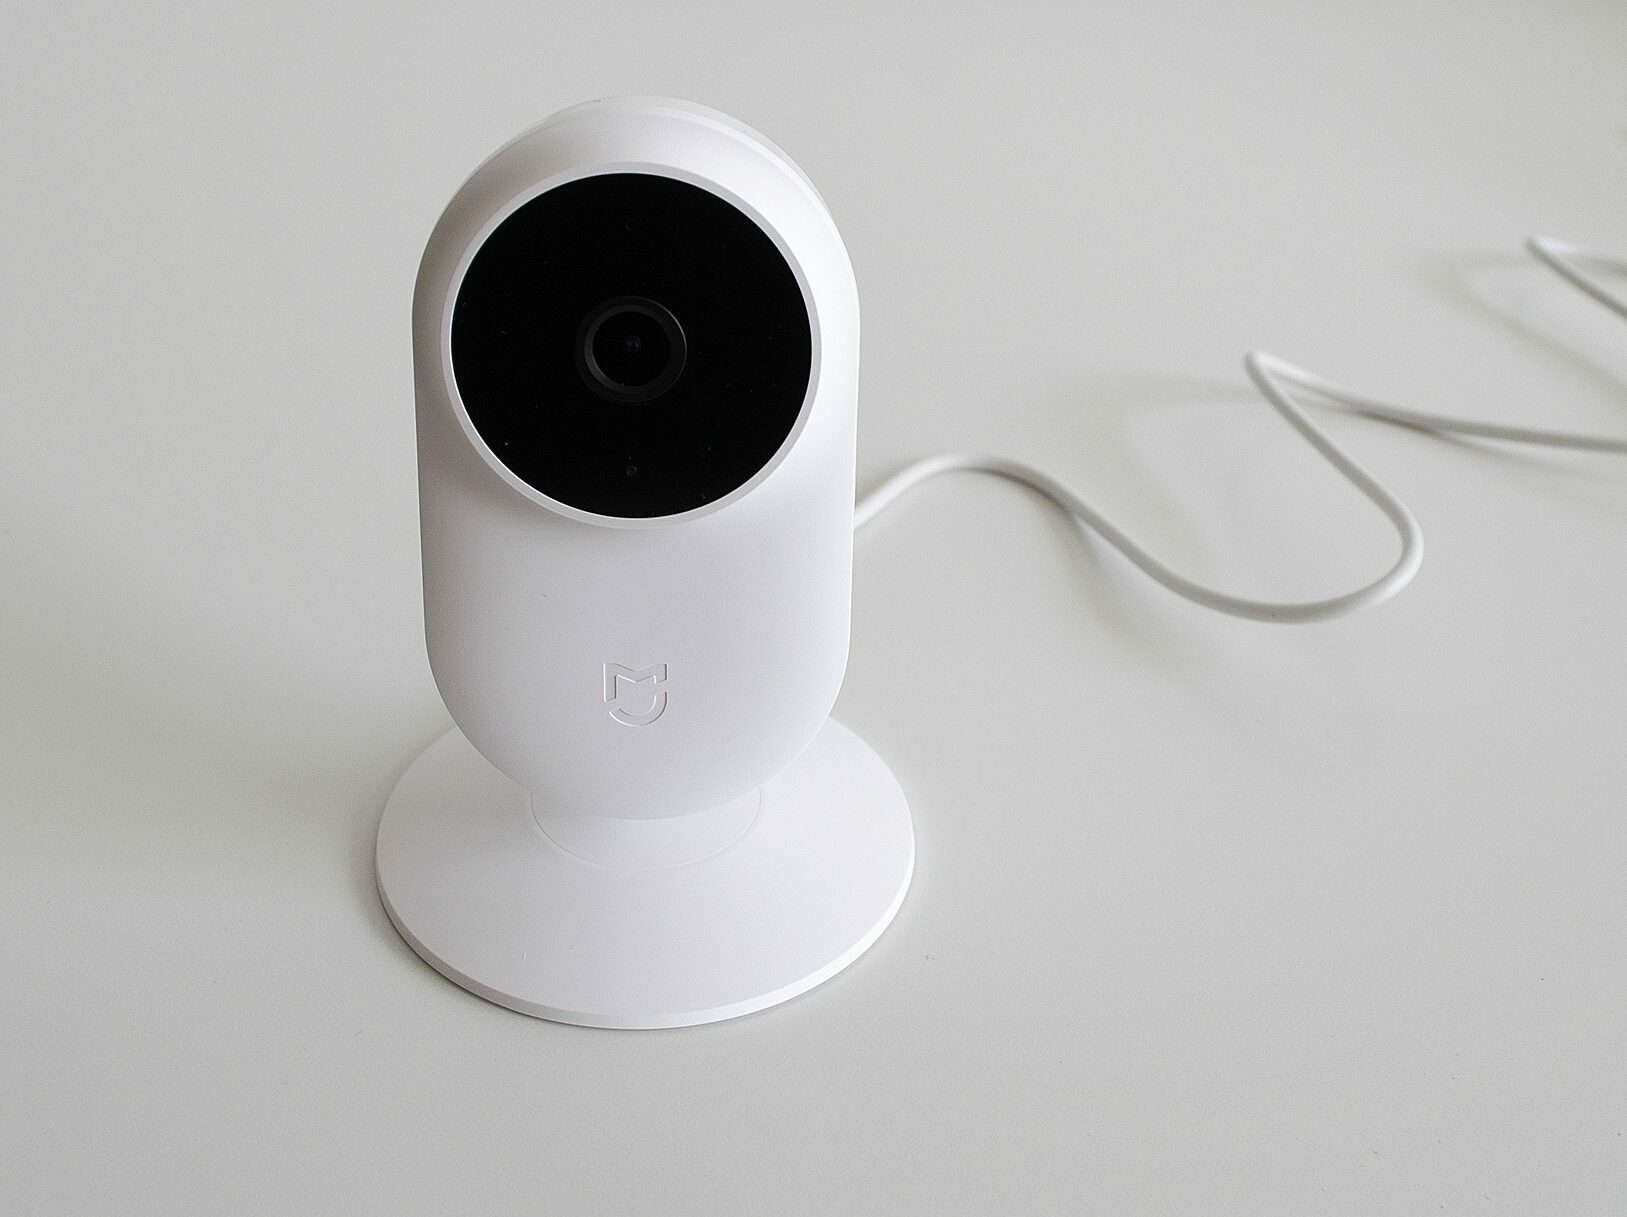 A white, modern security camera on top of a grey surface with a wire behind it.